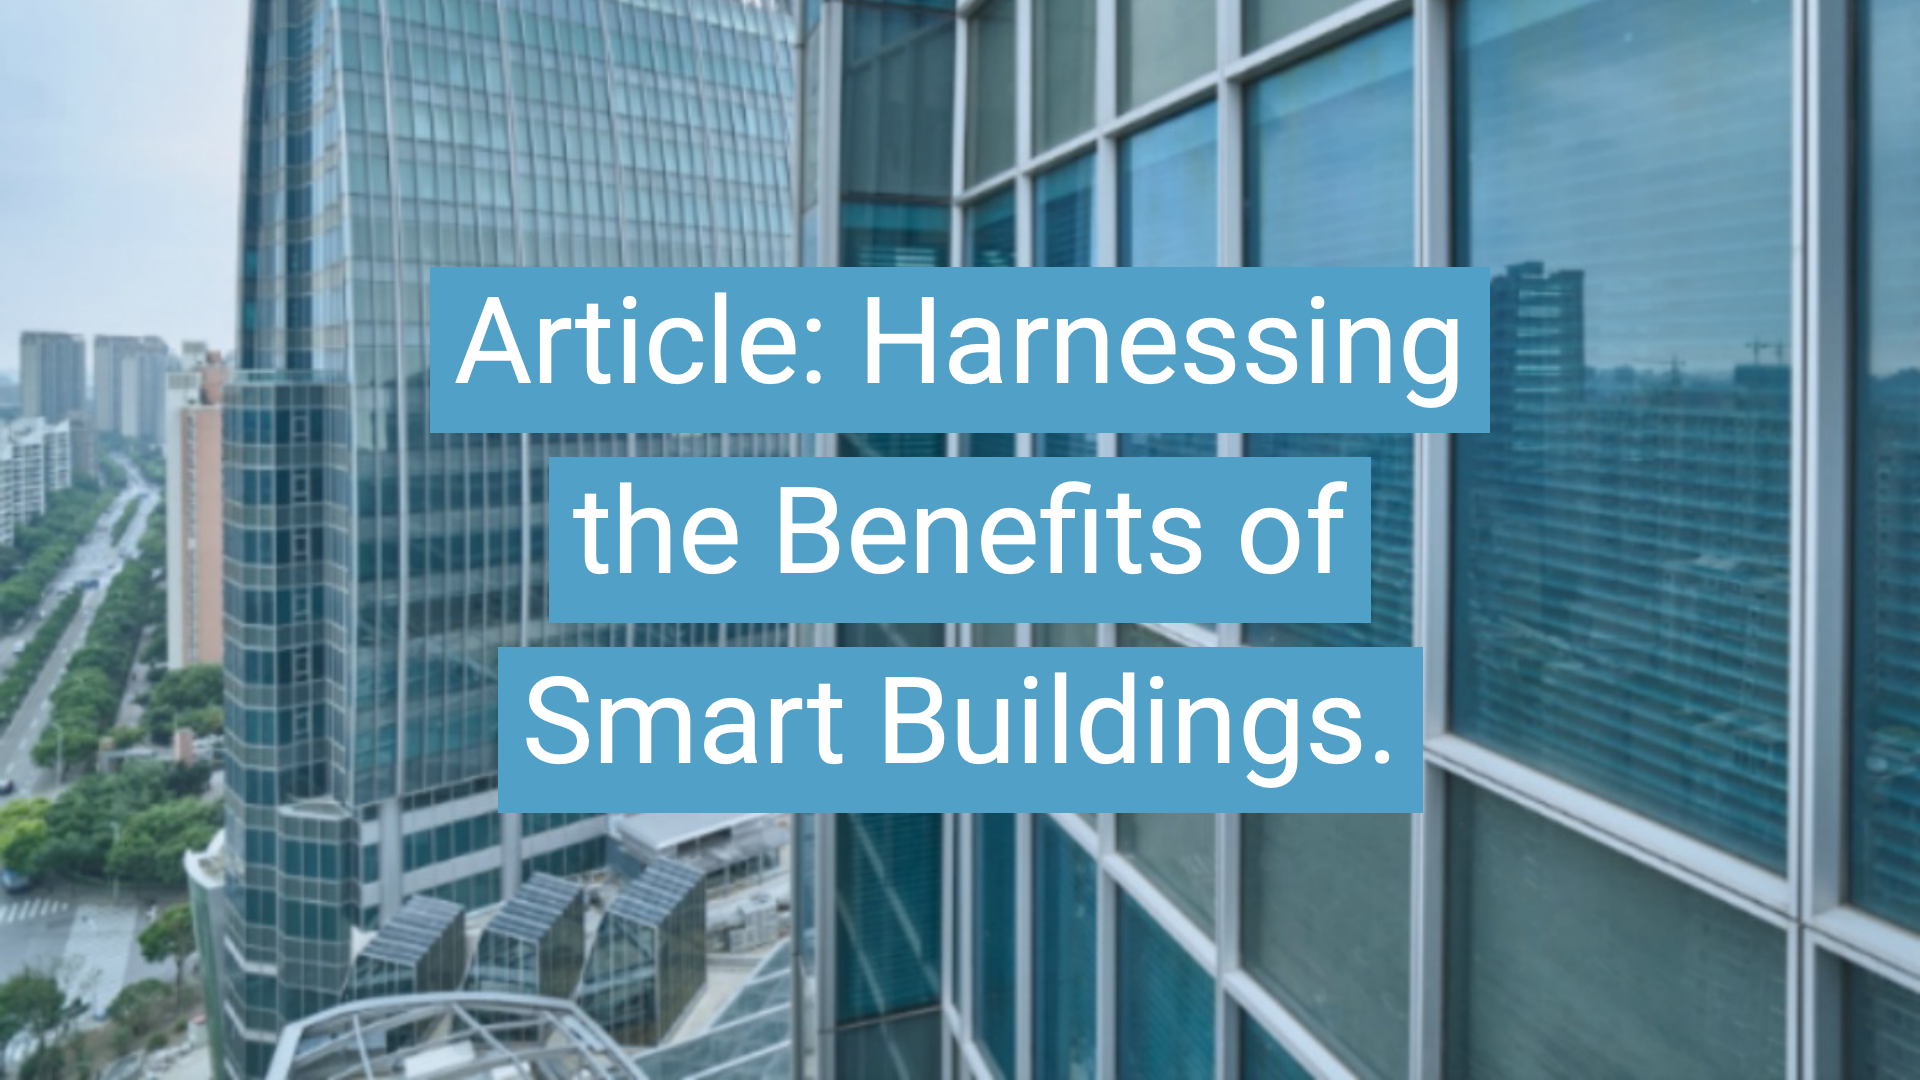 Harnessing the Benefits of Smart Buildings